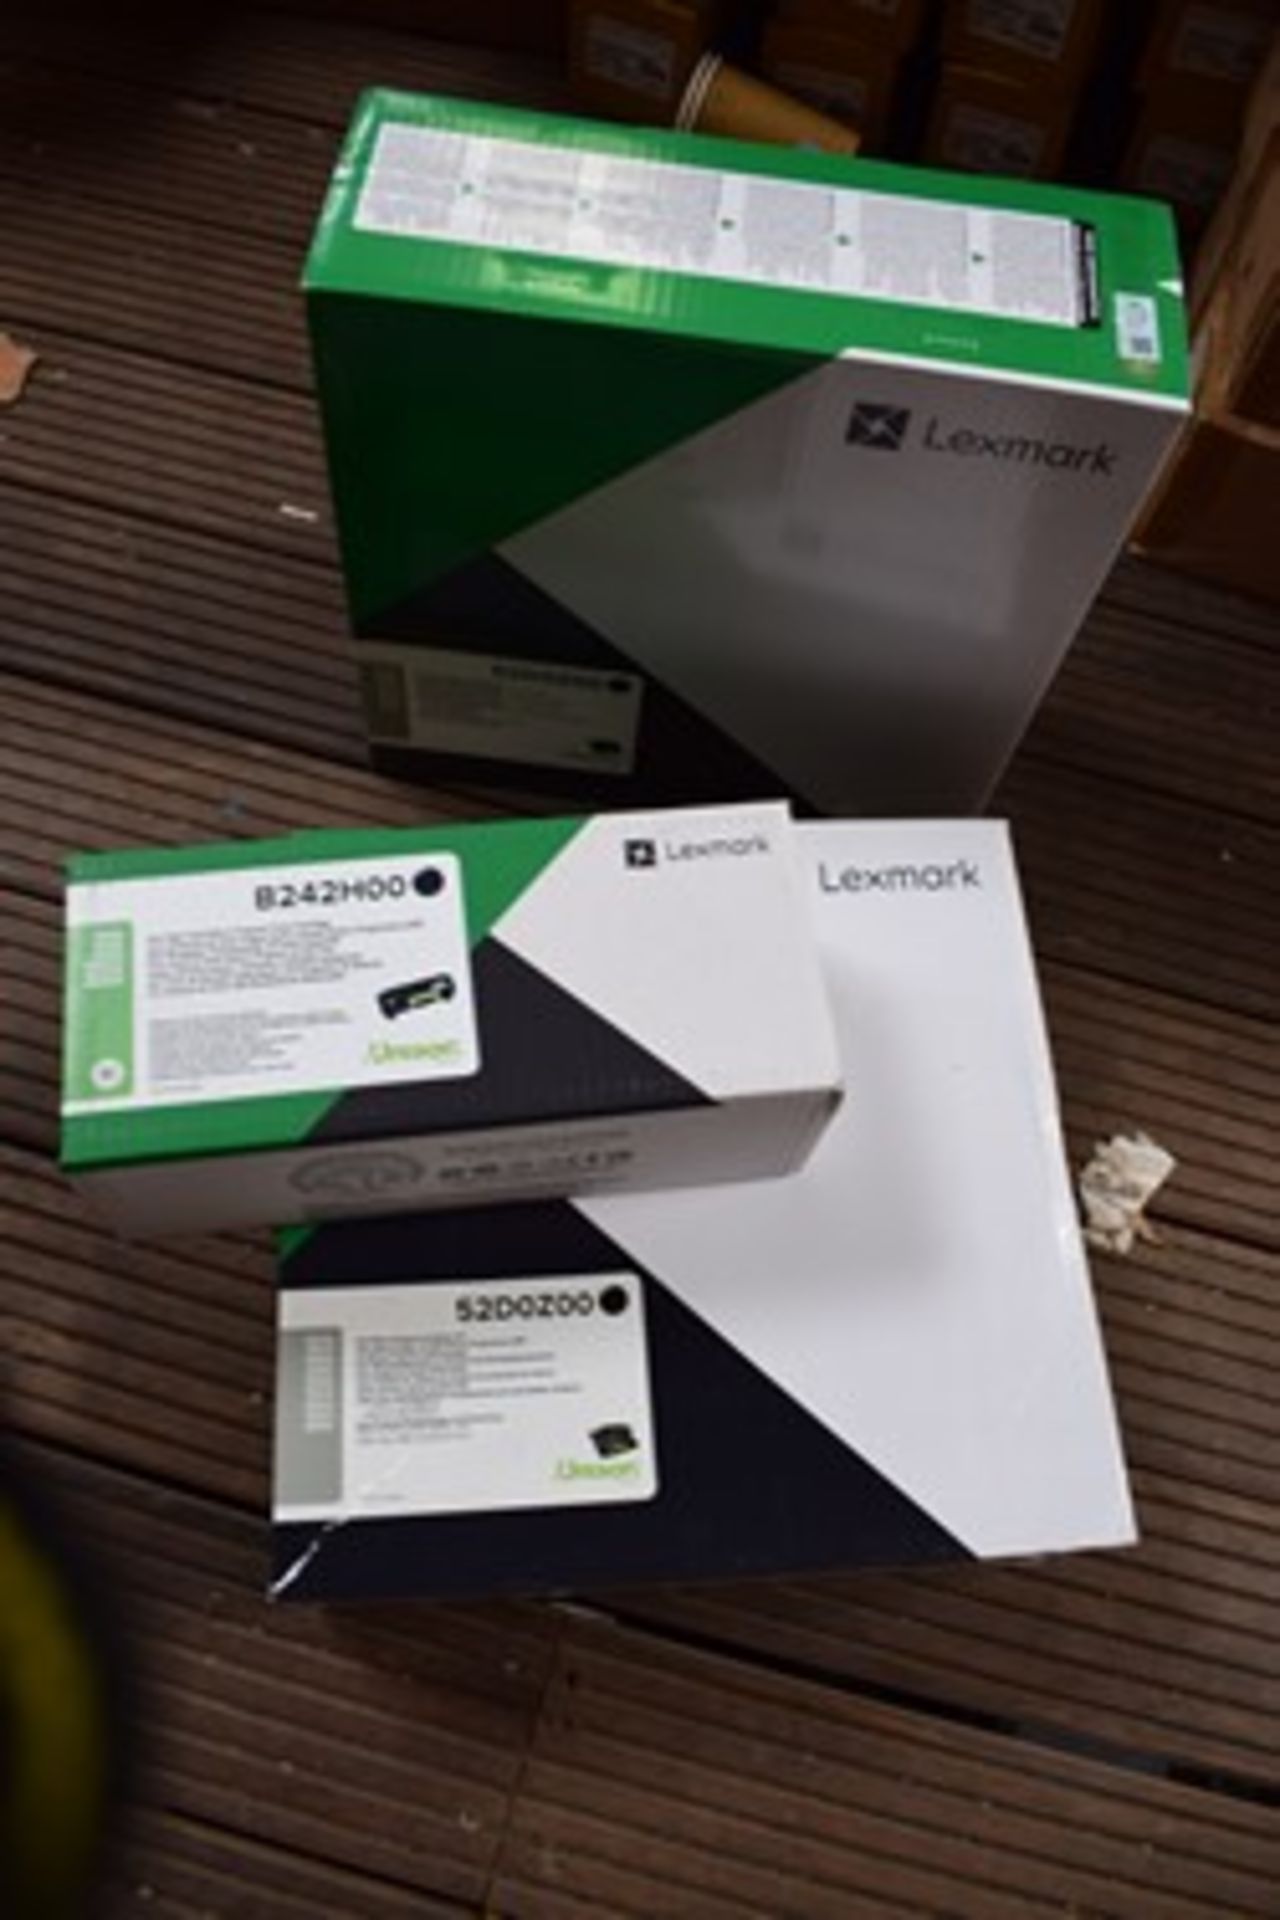 2 x Lexmark 52D0Zoo imaging units and 1 x Lexmark B242H00 high yield toner cartridge - Sealed new in